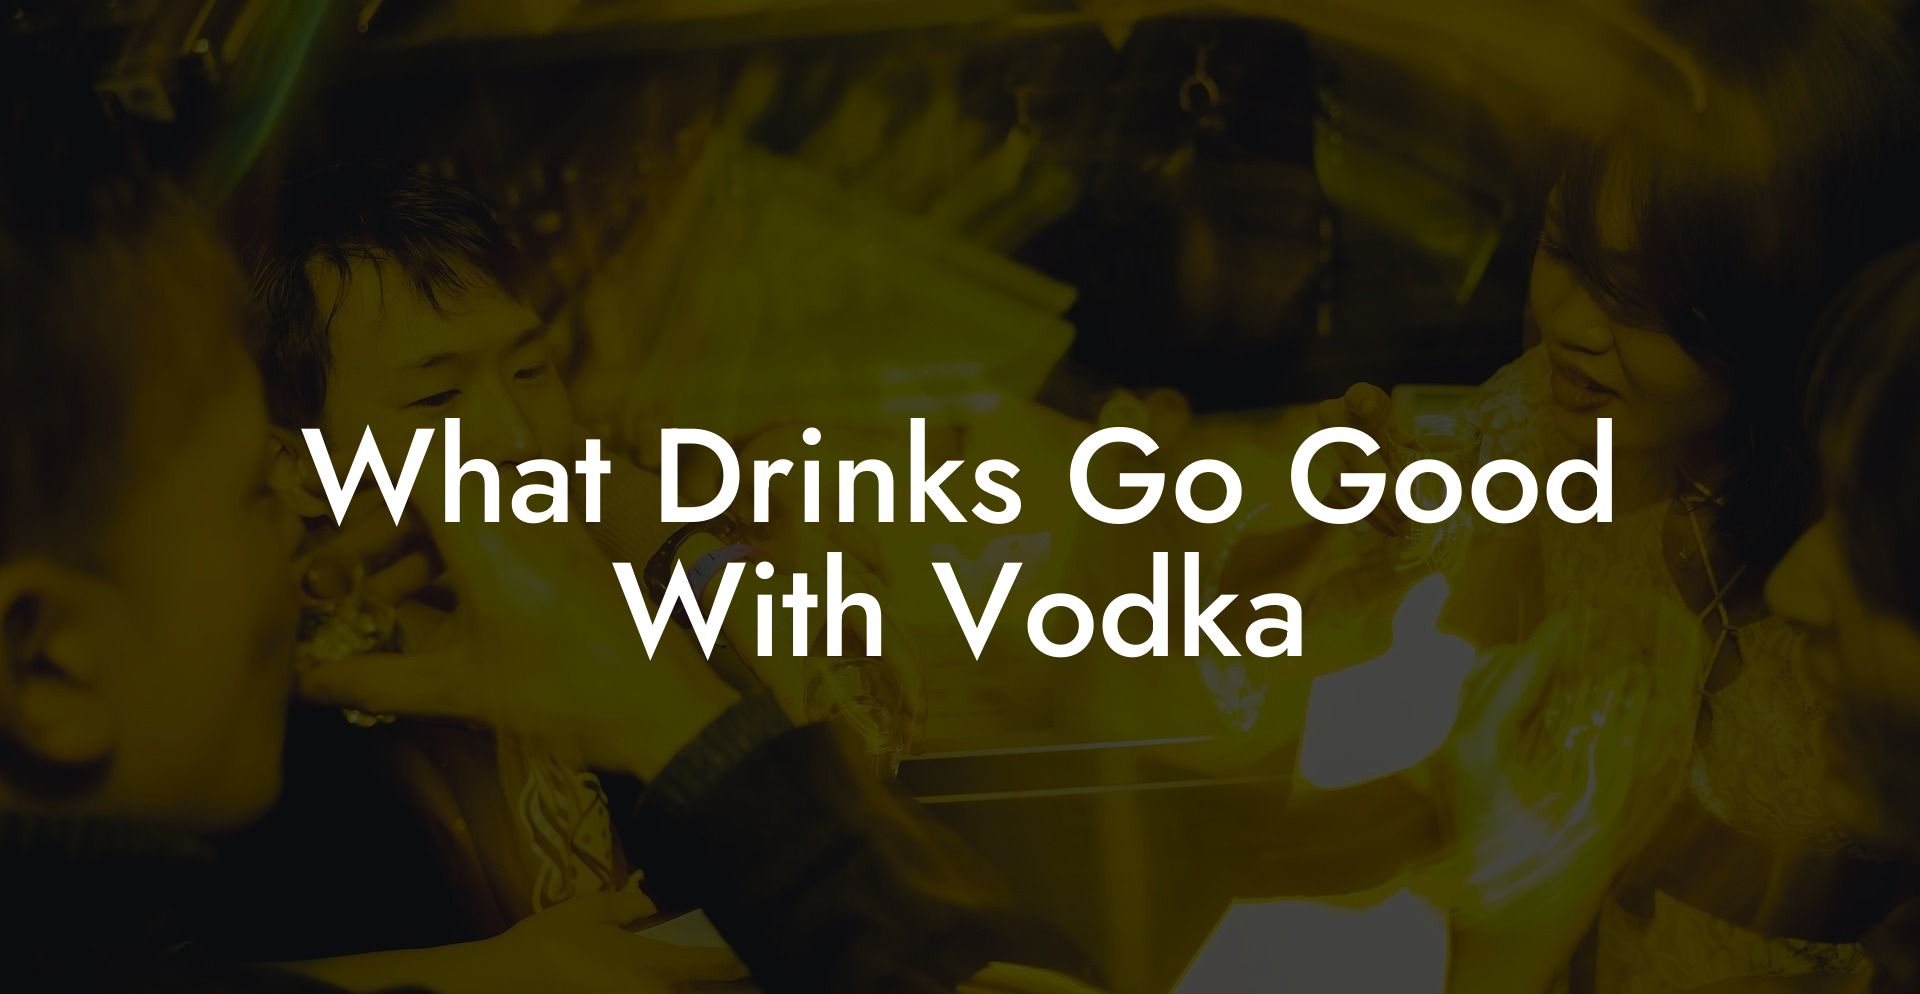 What Drinks Go Good With Vodka